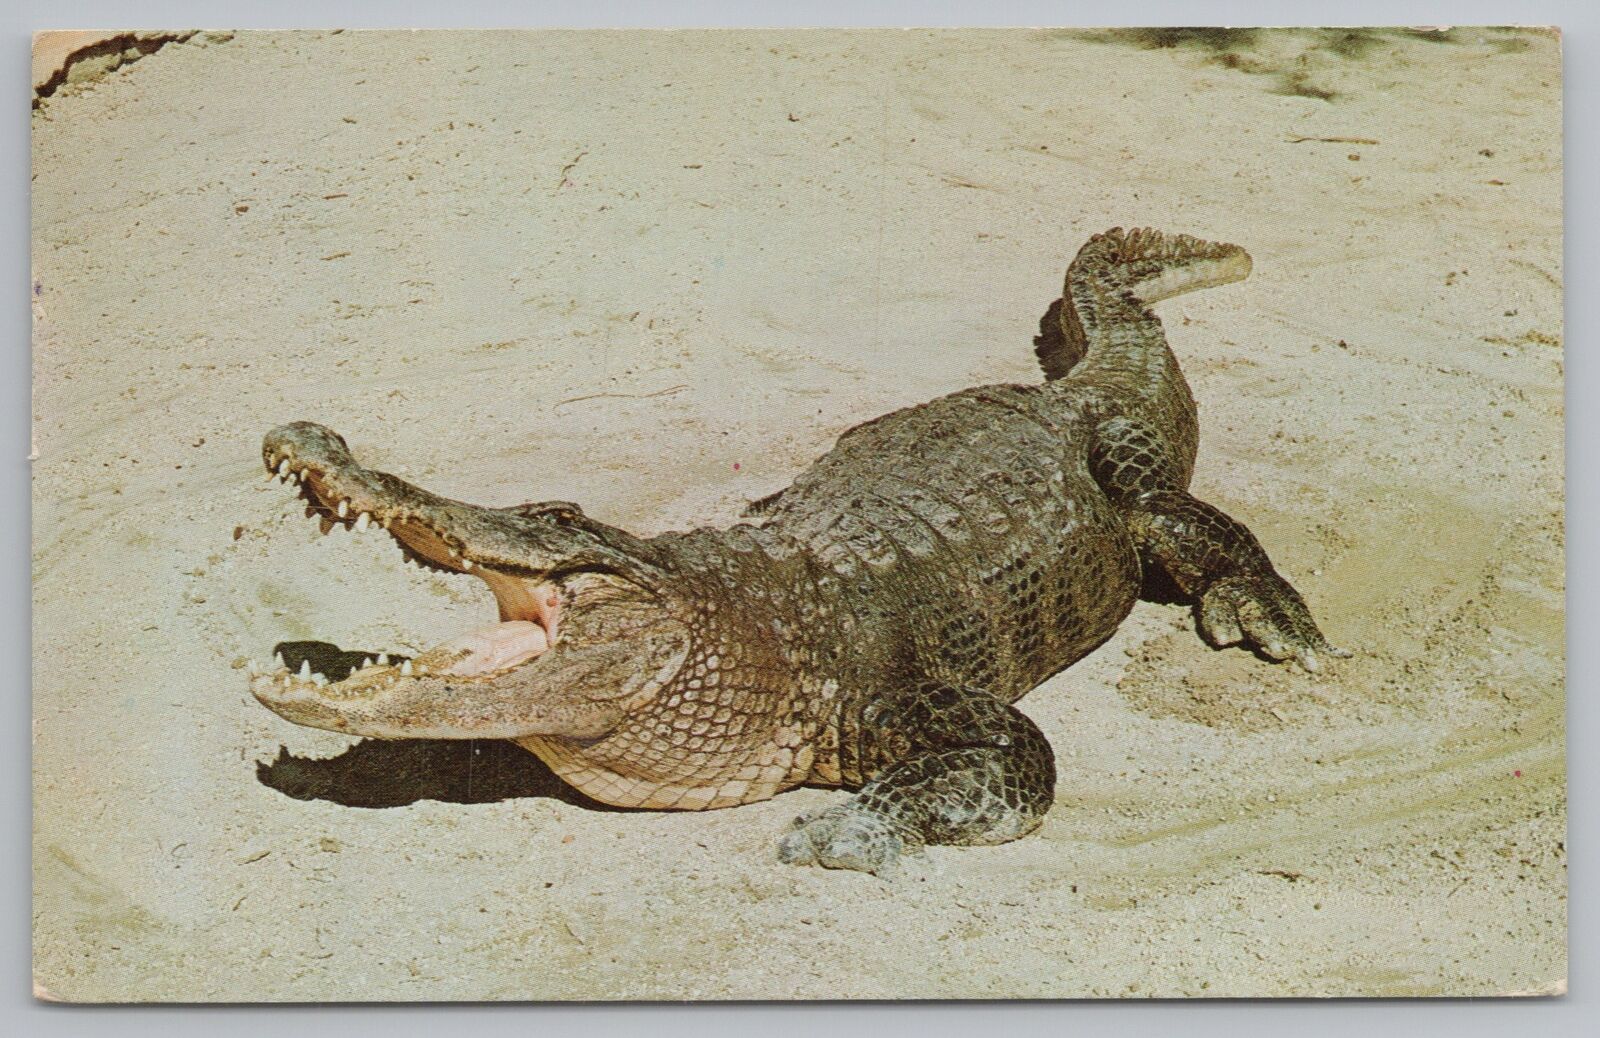 Animal~Alligator Laying In Sand~Full Grown 15 To 20 Feet~PM 1961~Vintage PC